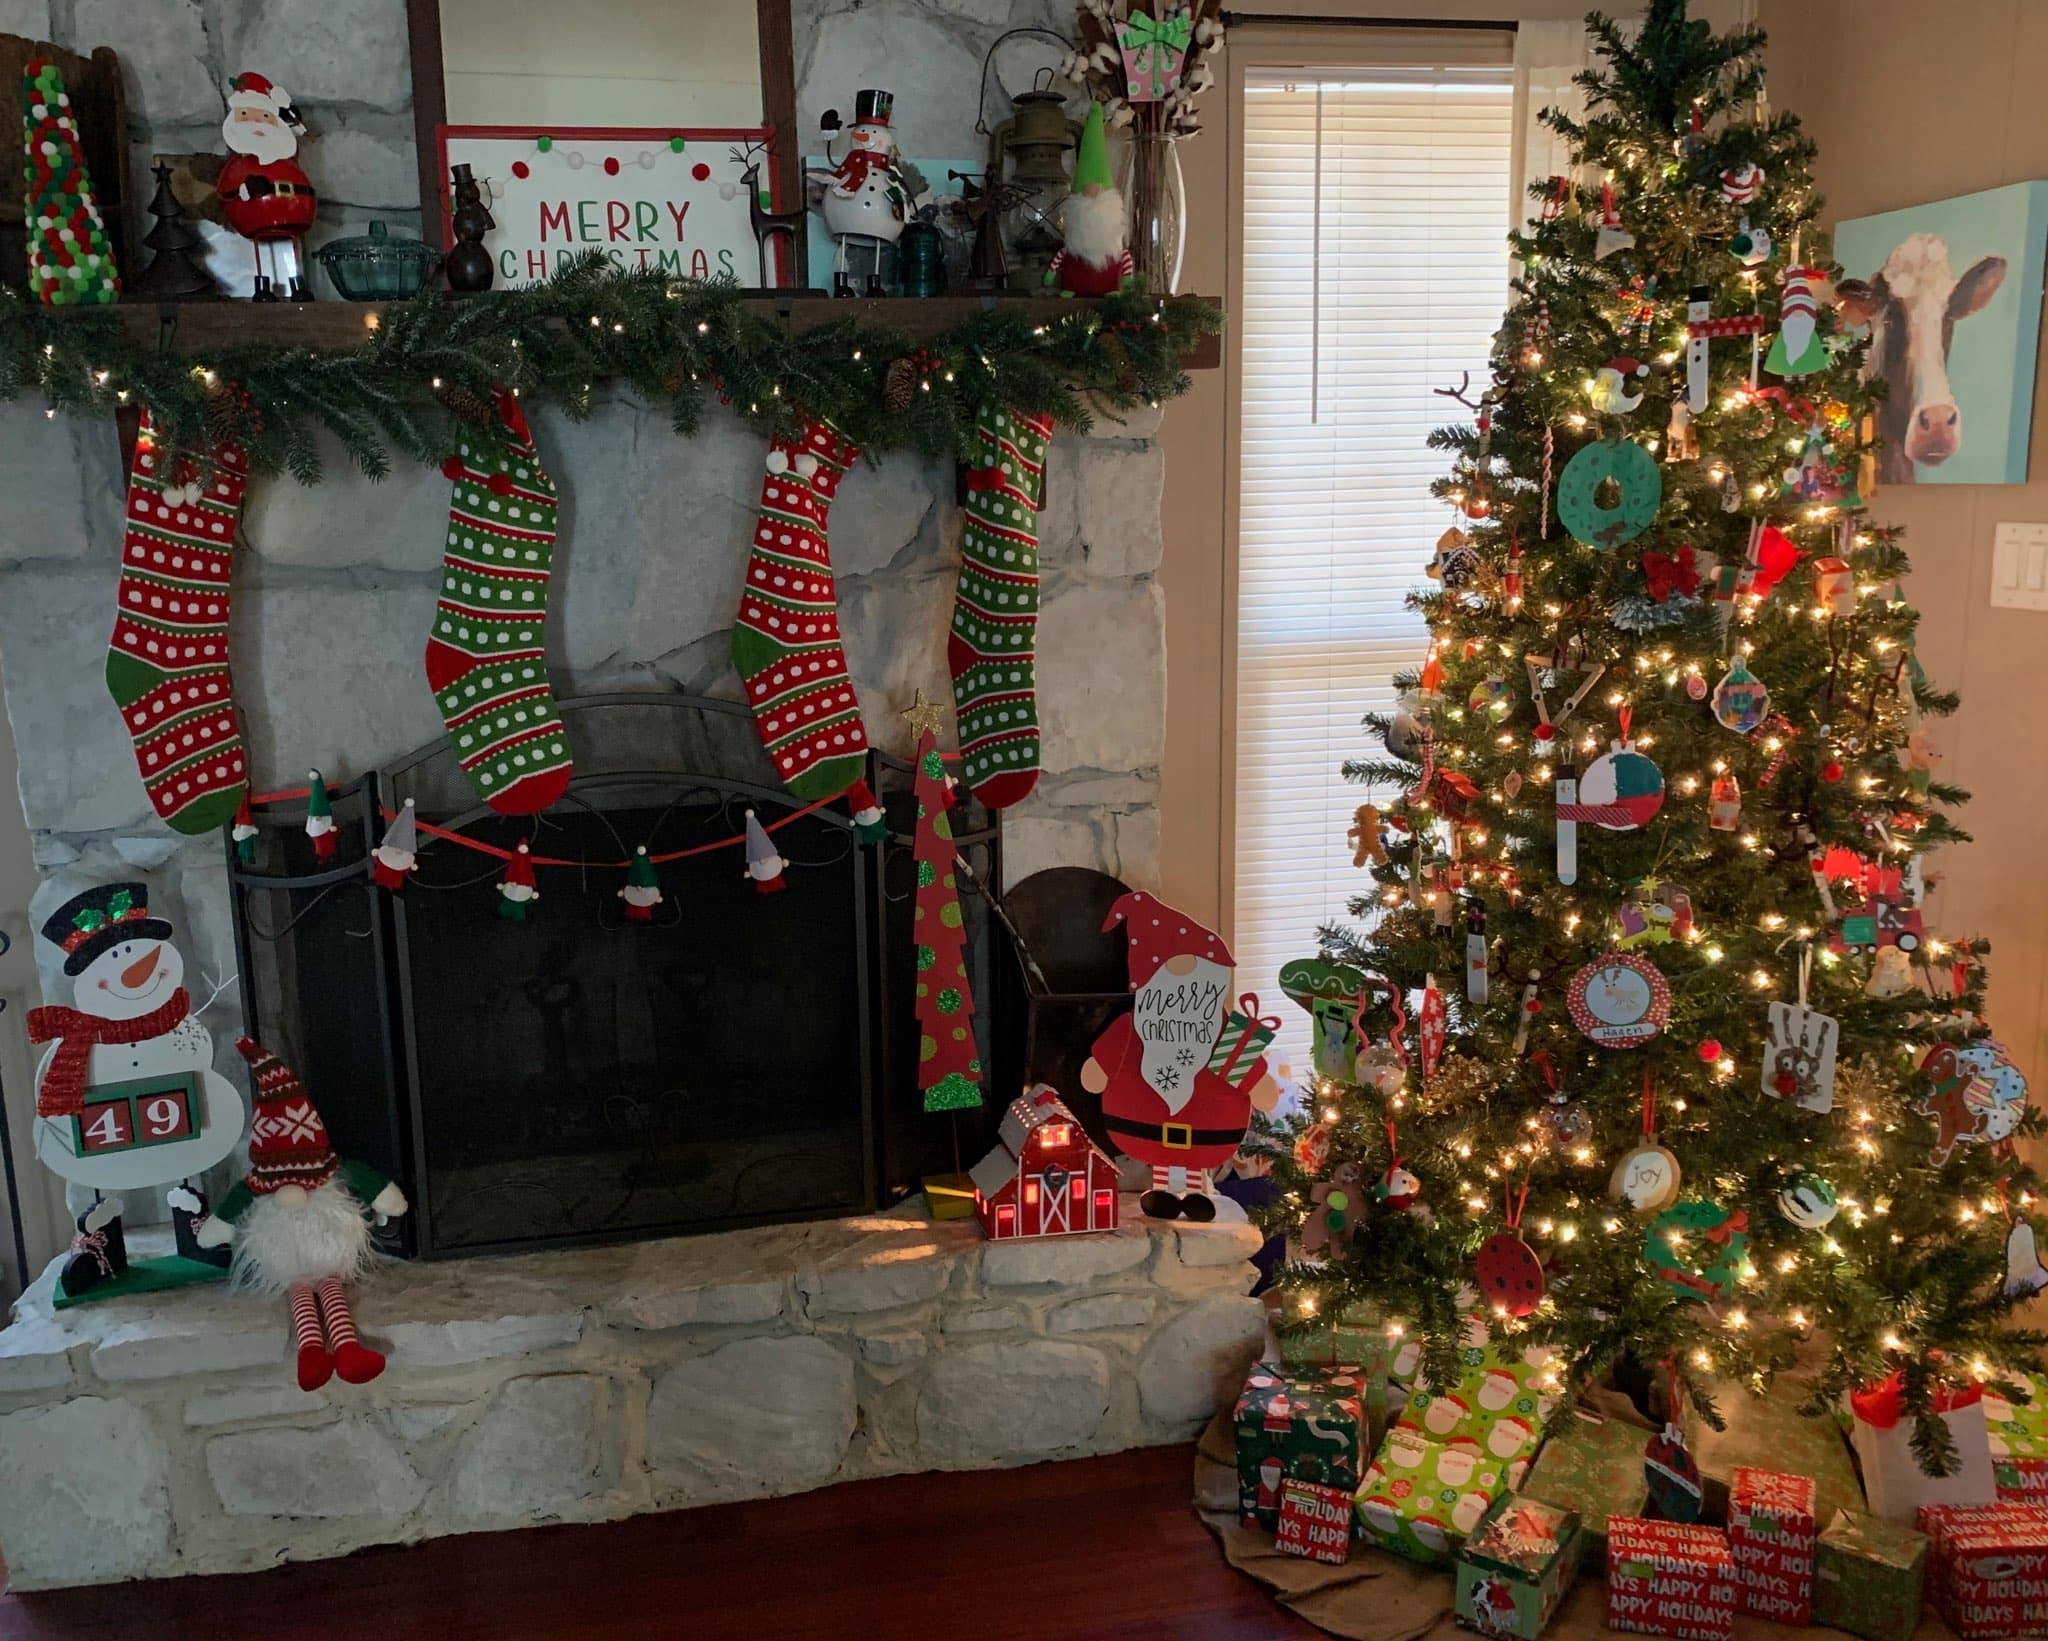 Local families decorating early for Christmas to offset gloom and doom